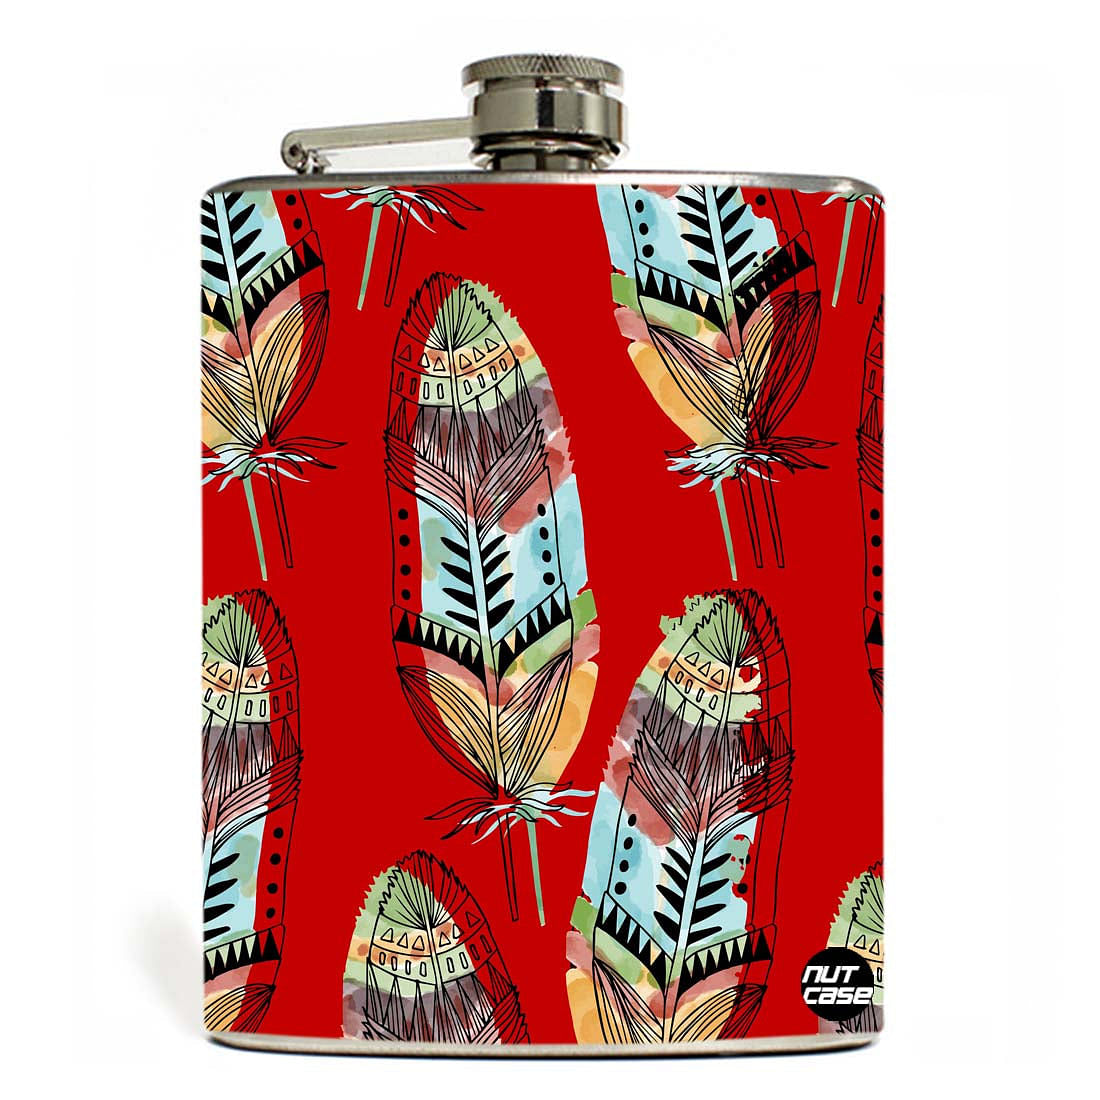 Hip Flask - Blood Feathers Nutcase